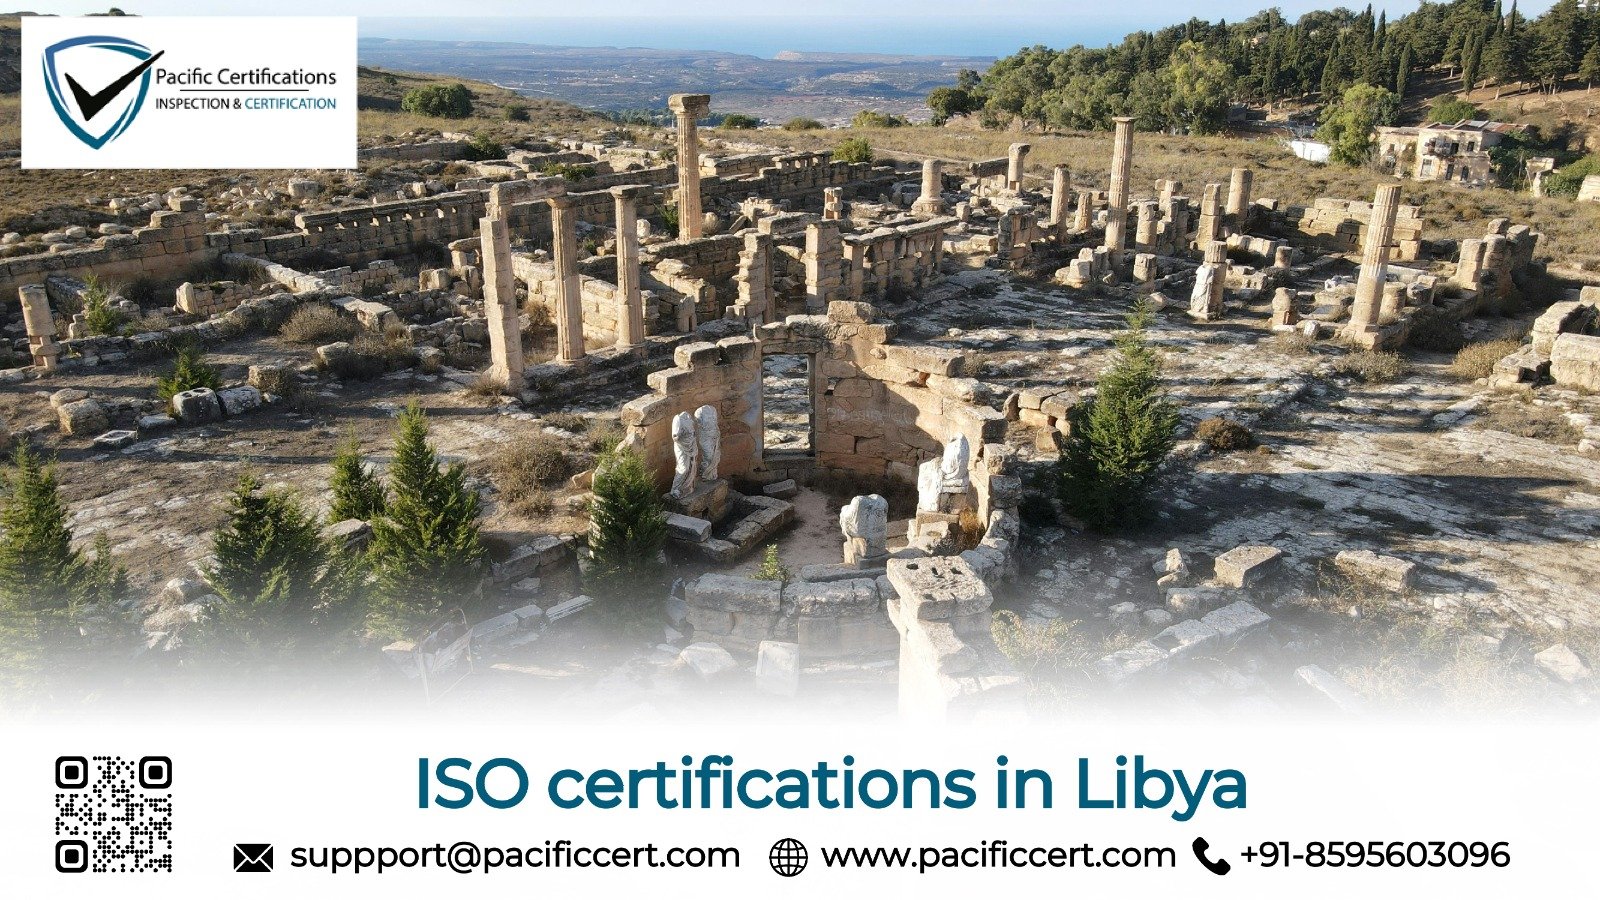 ISO Certifications in Libya and How Pacific Certifications can help | Pacific Certifications